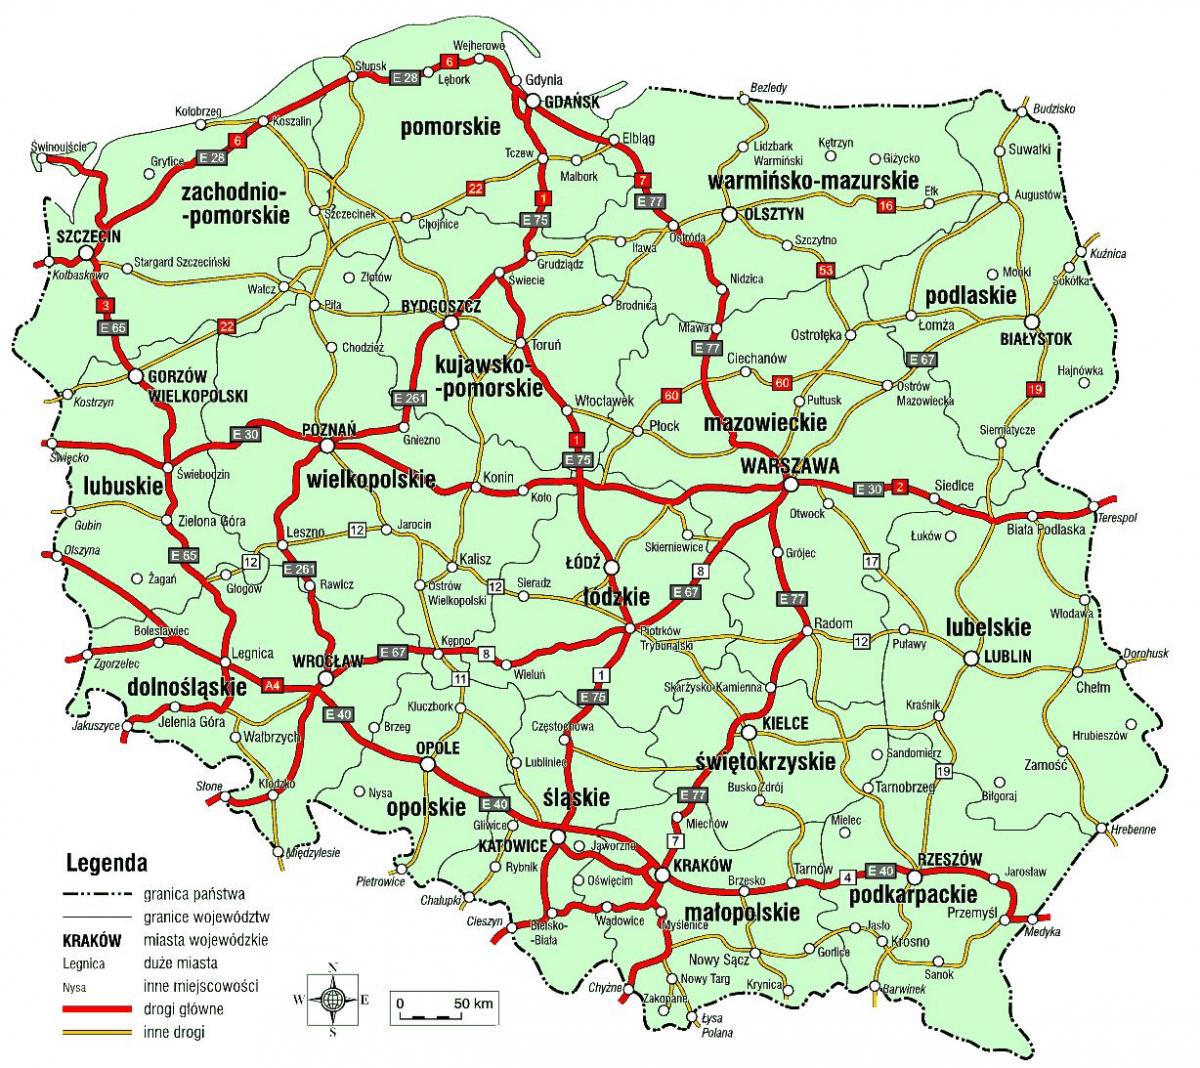 Driving map of Poland